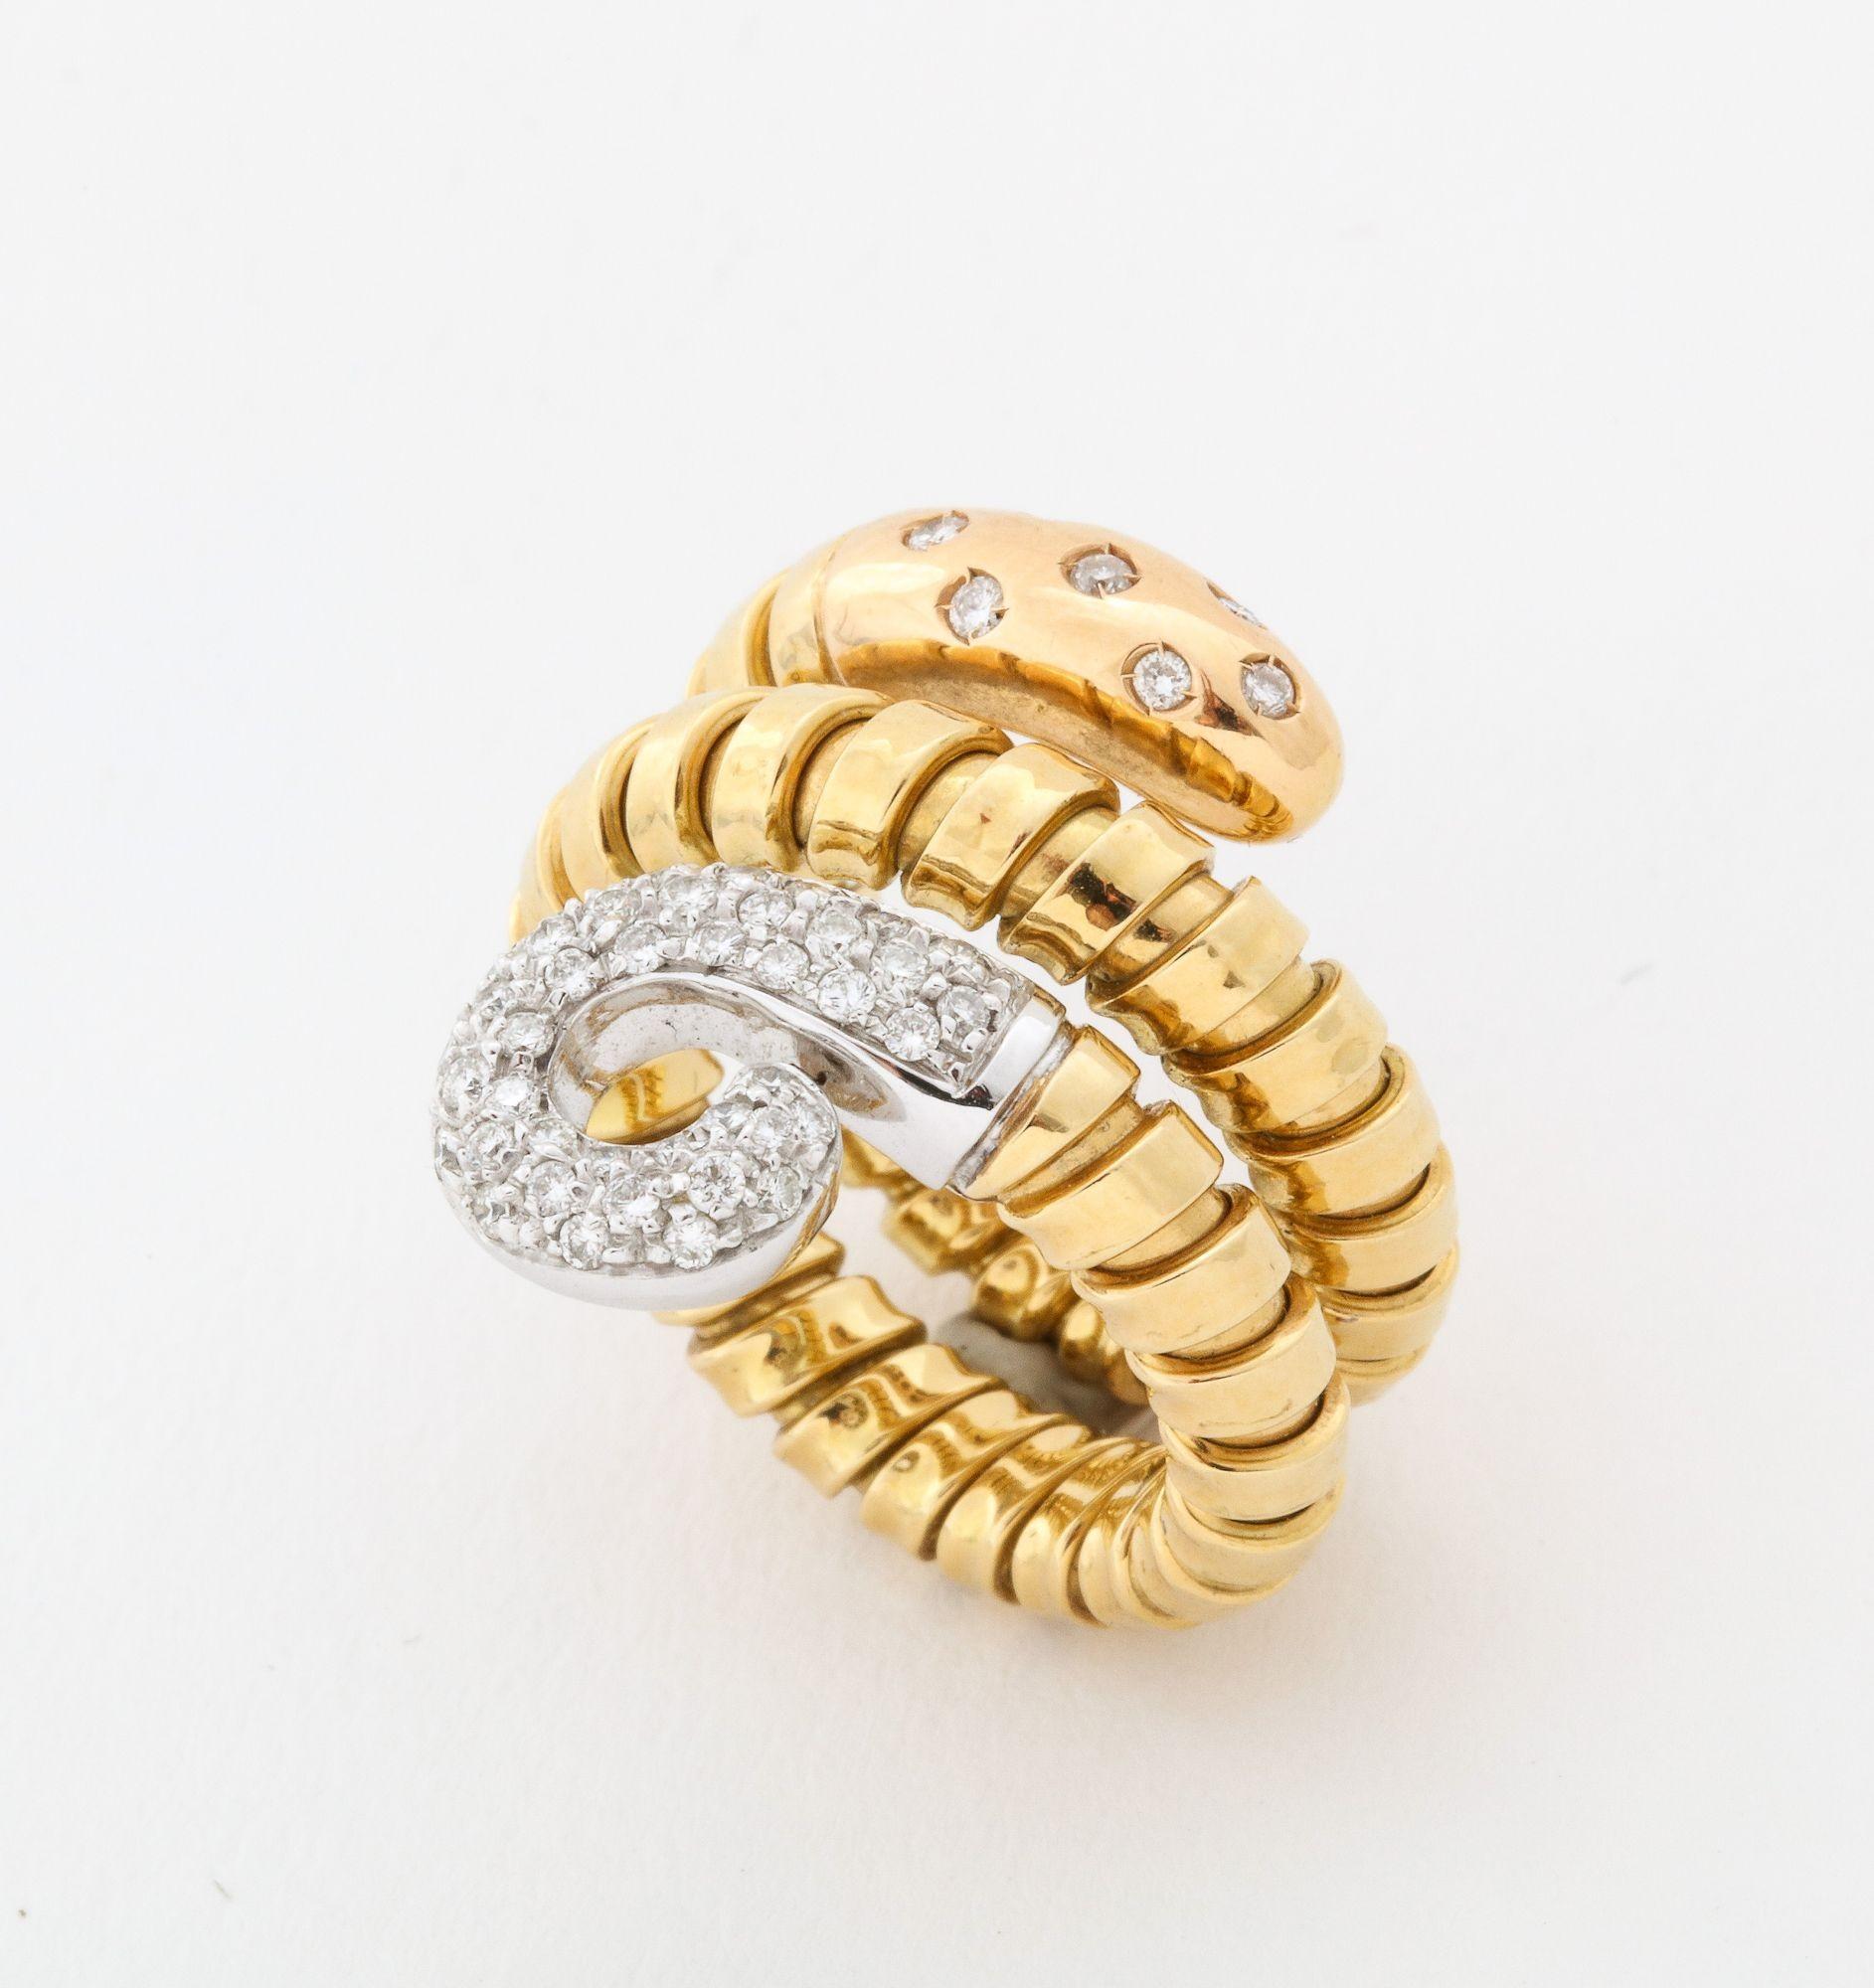 A flexible 18K Gold  Turbagas Snake Ring with a pave